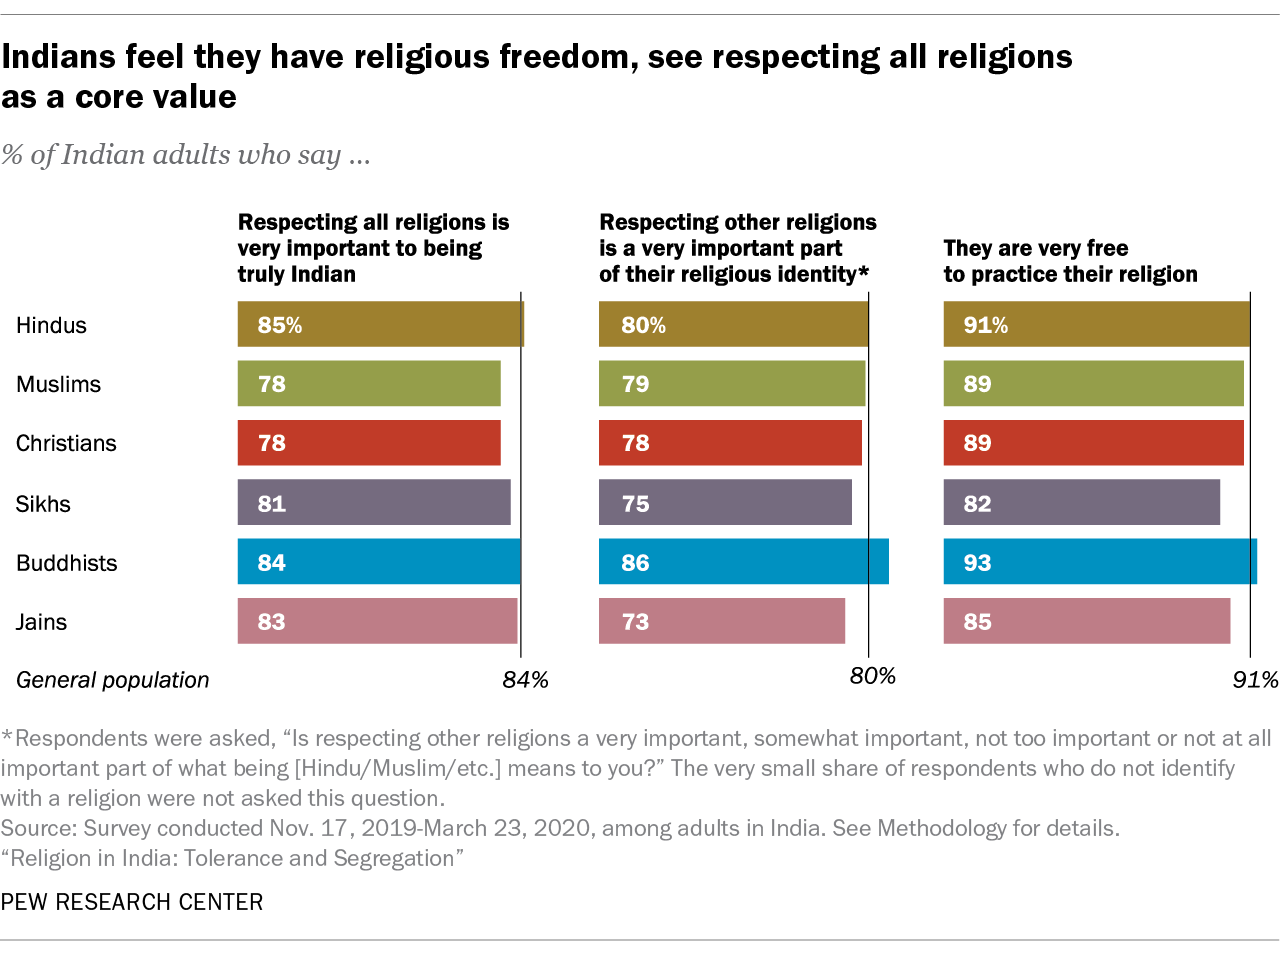 pew research center report on religion in india